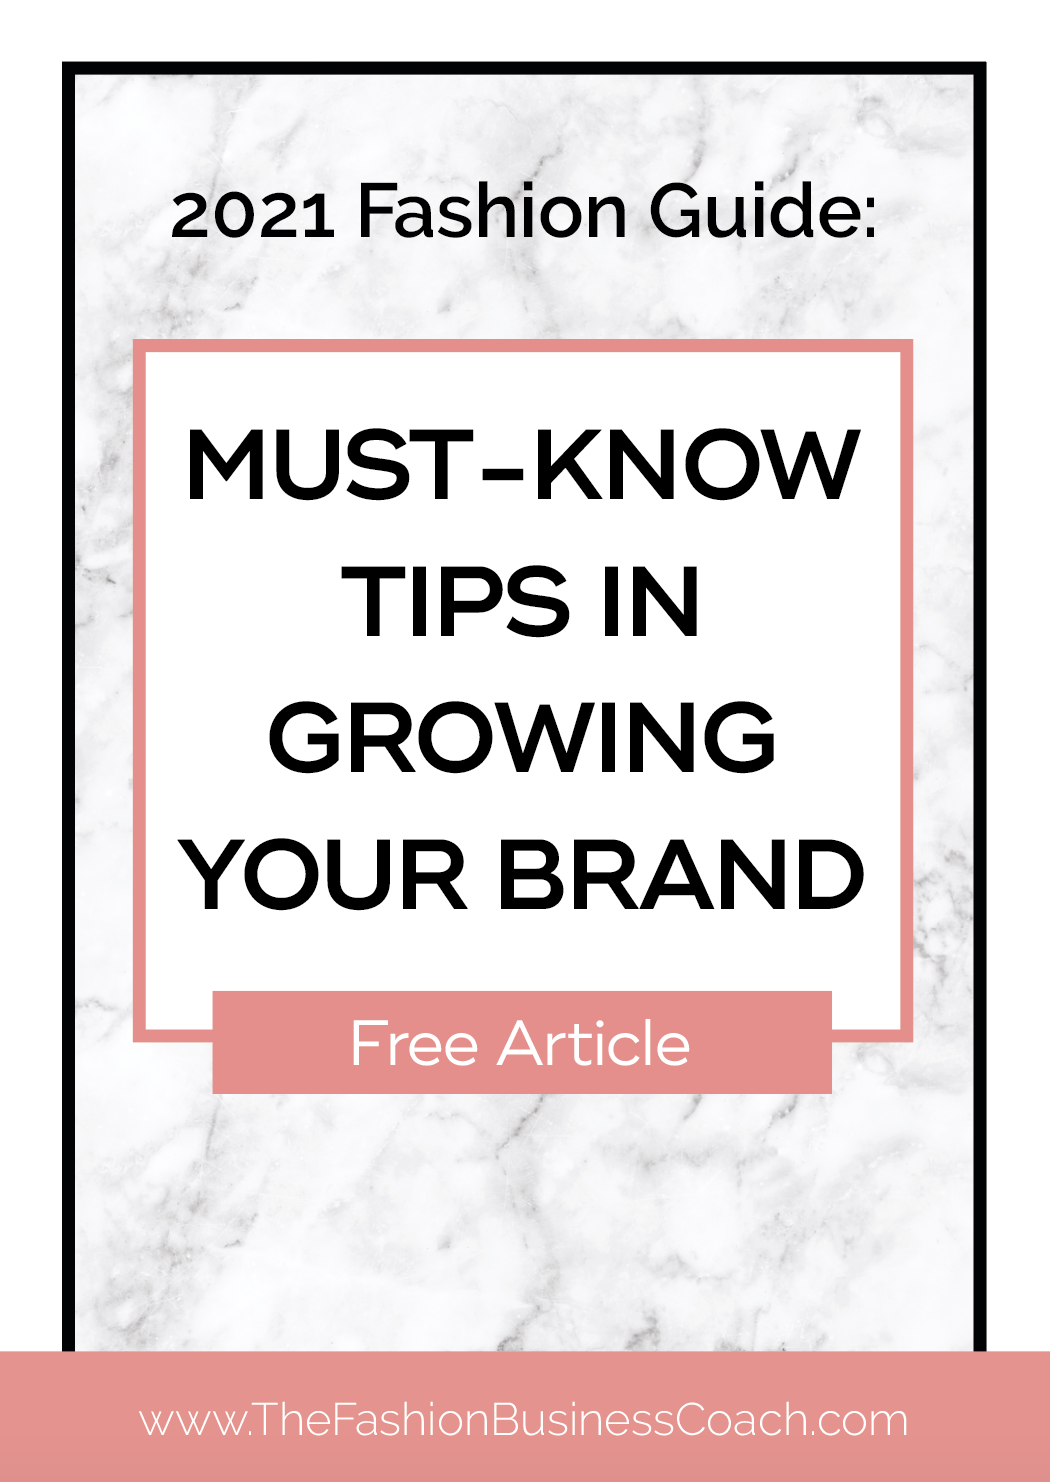 2021 Fashion Guide Must-Know Tips in Growing your Brand 2.png